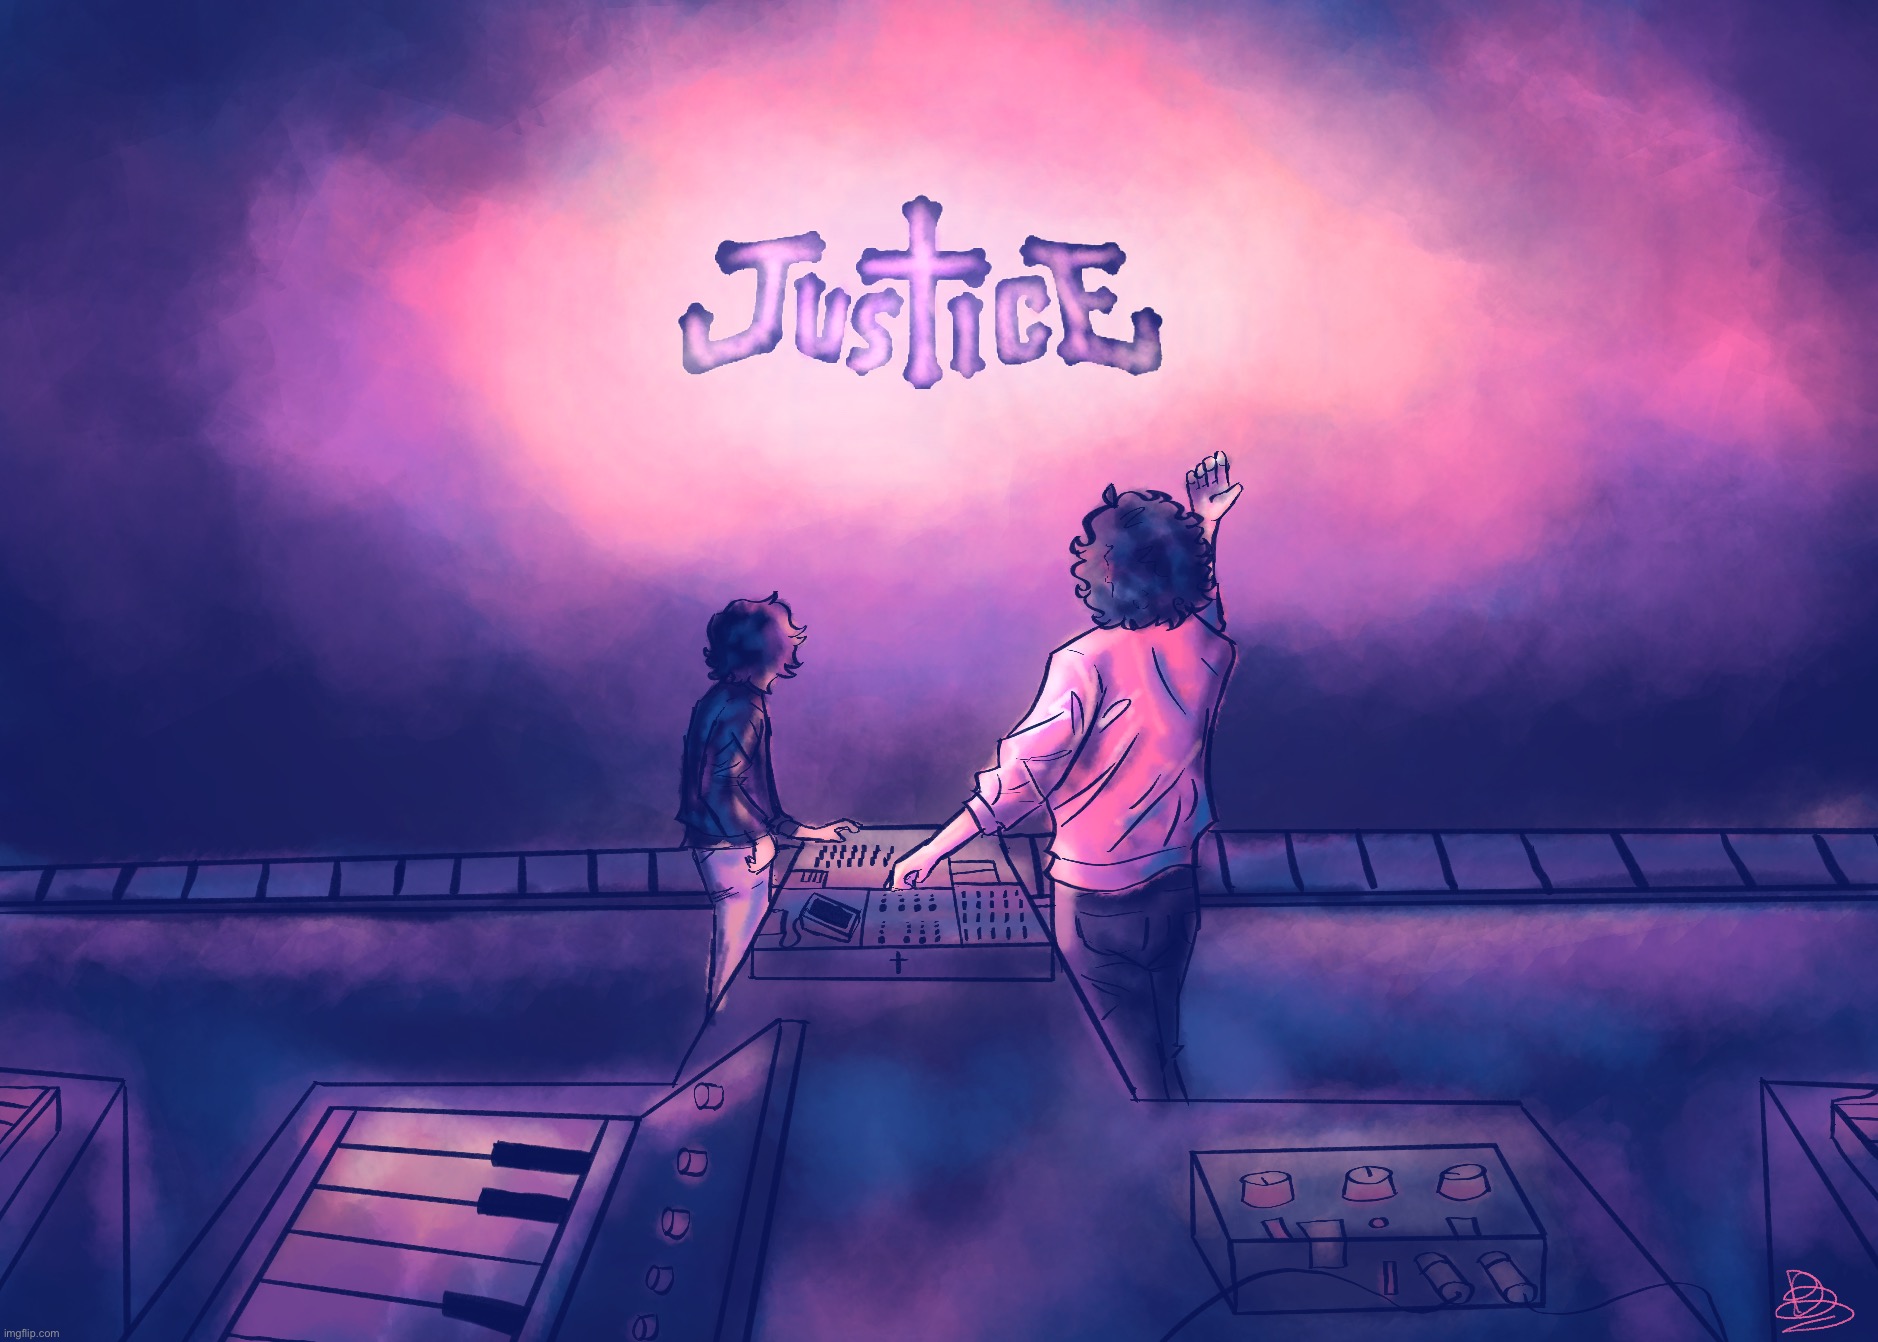 Let There Be Light. | image tagged in justice,justice band,art | made w/ Imgflip meme maker